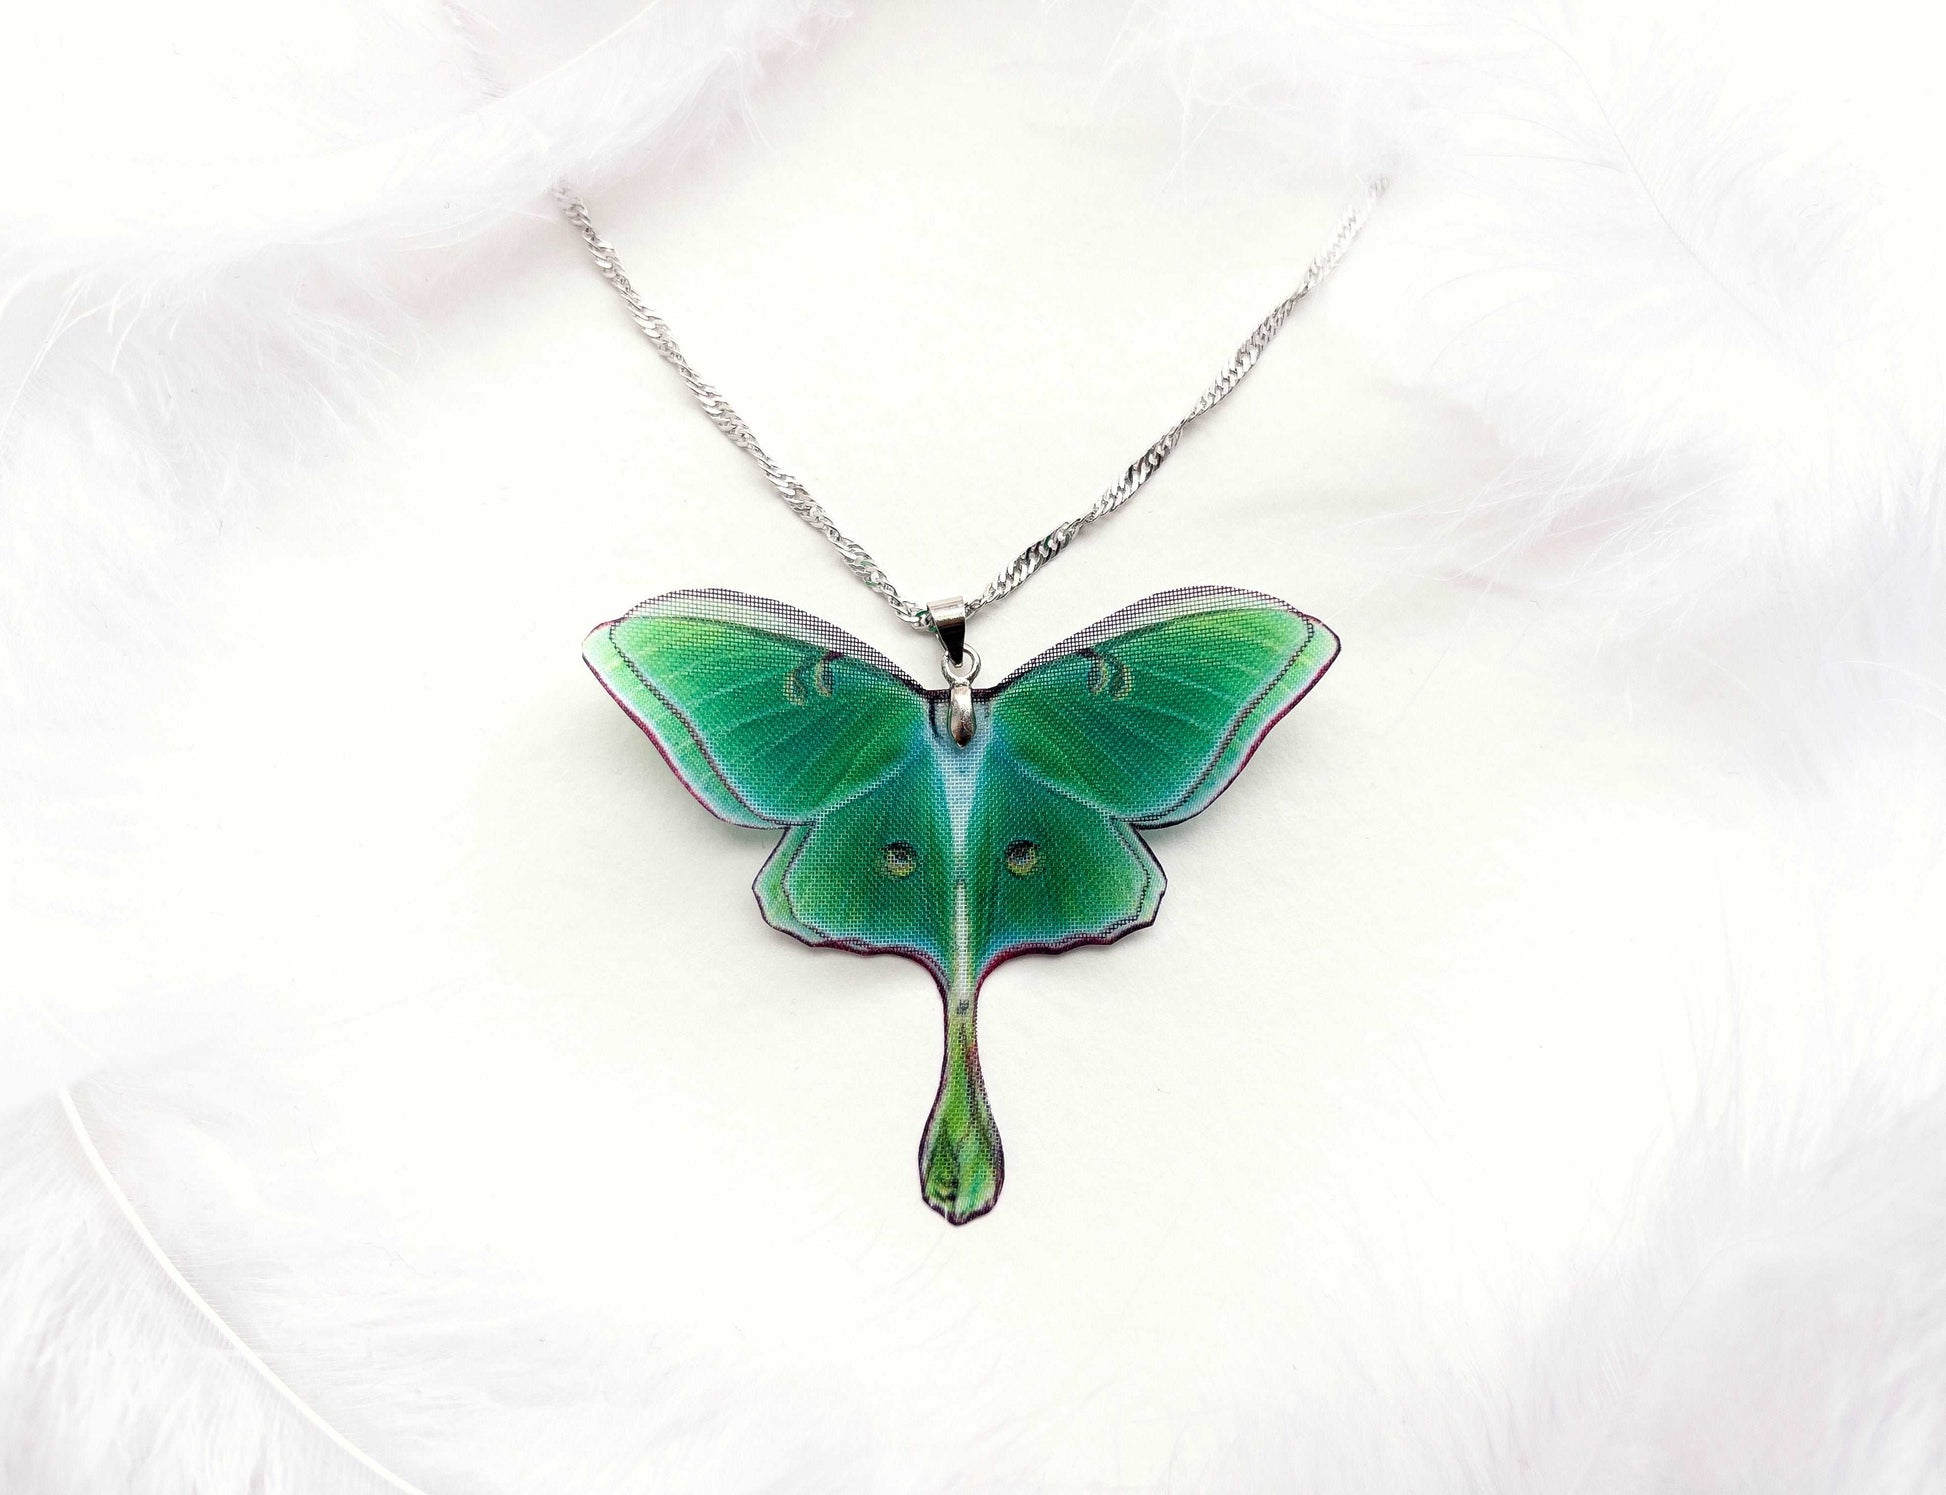 Green Lunar Moth Pendant with chain on a white background - Perfect for everyday wear or special occasions